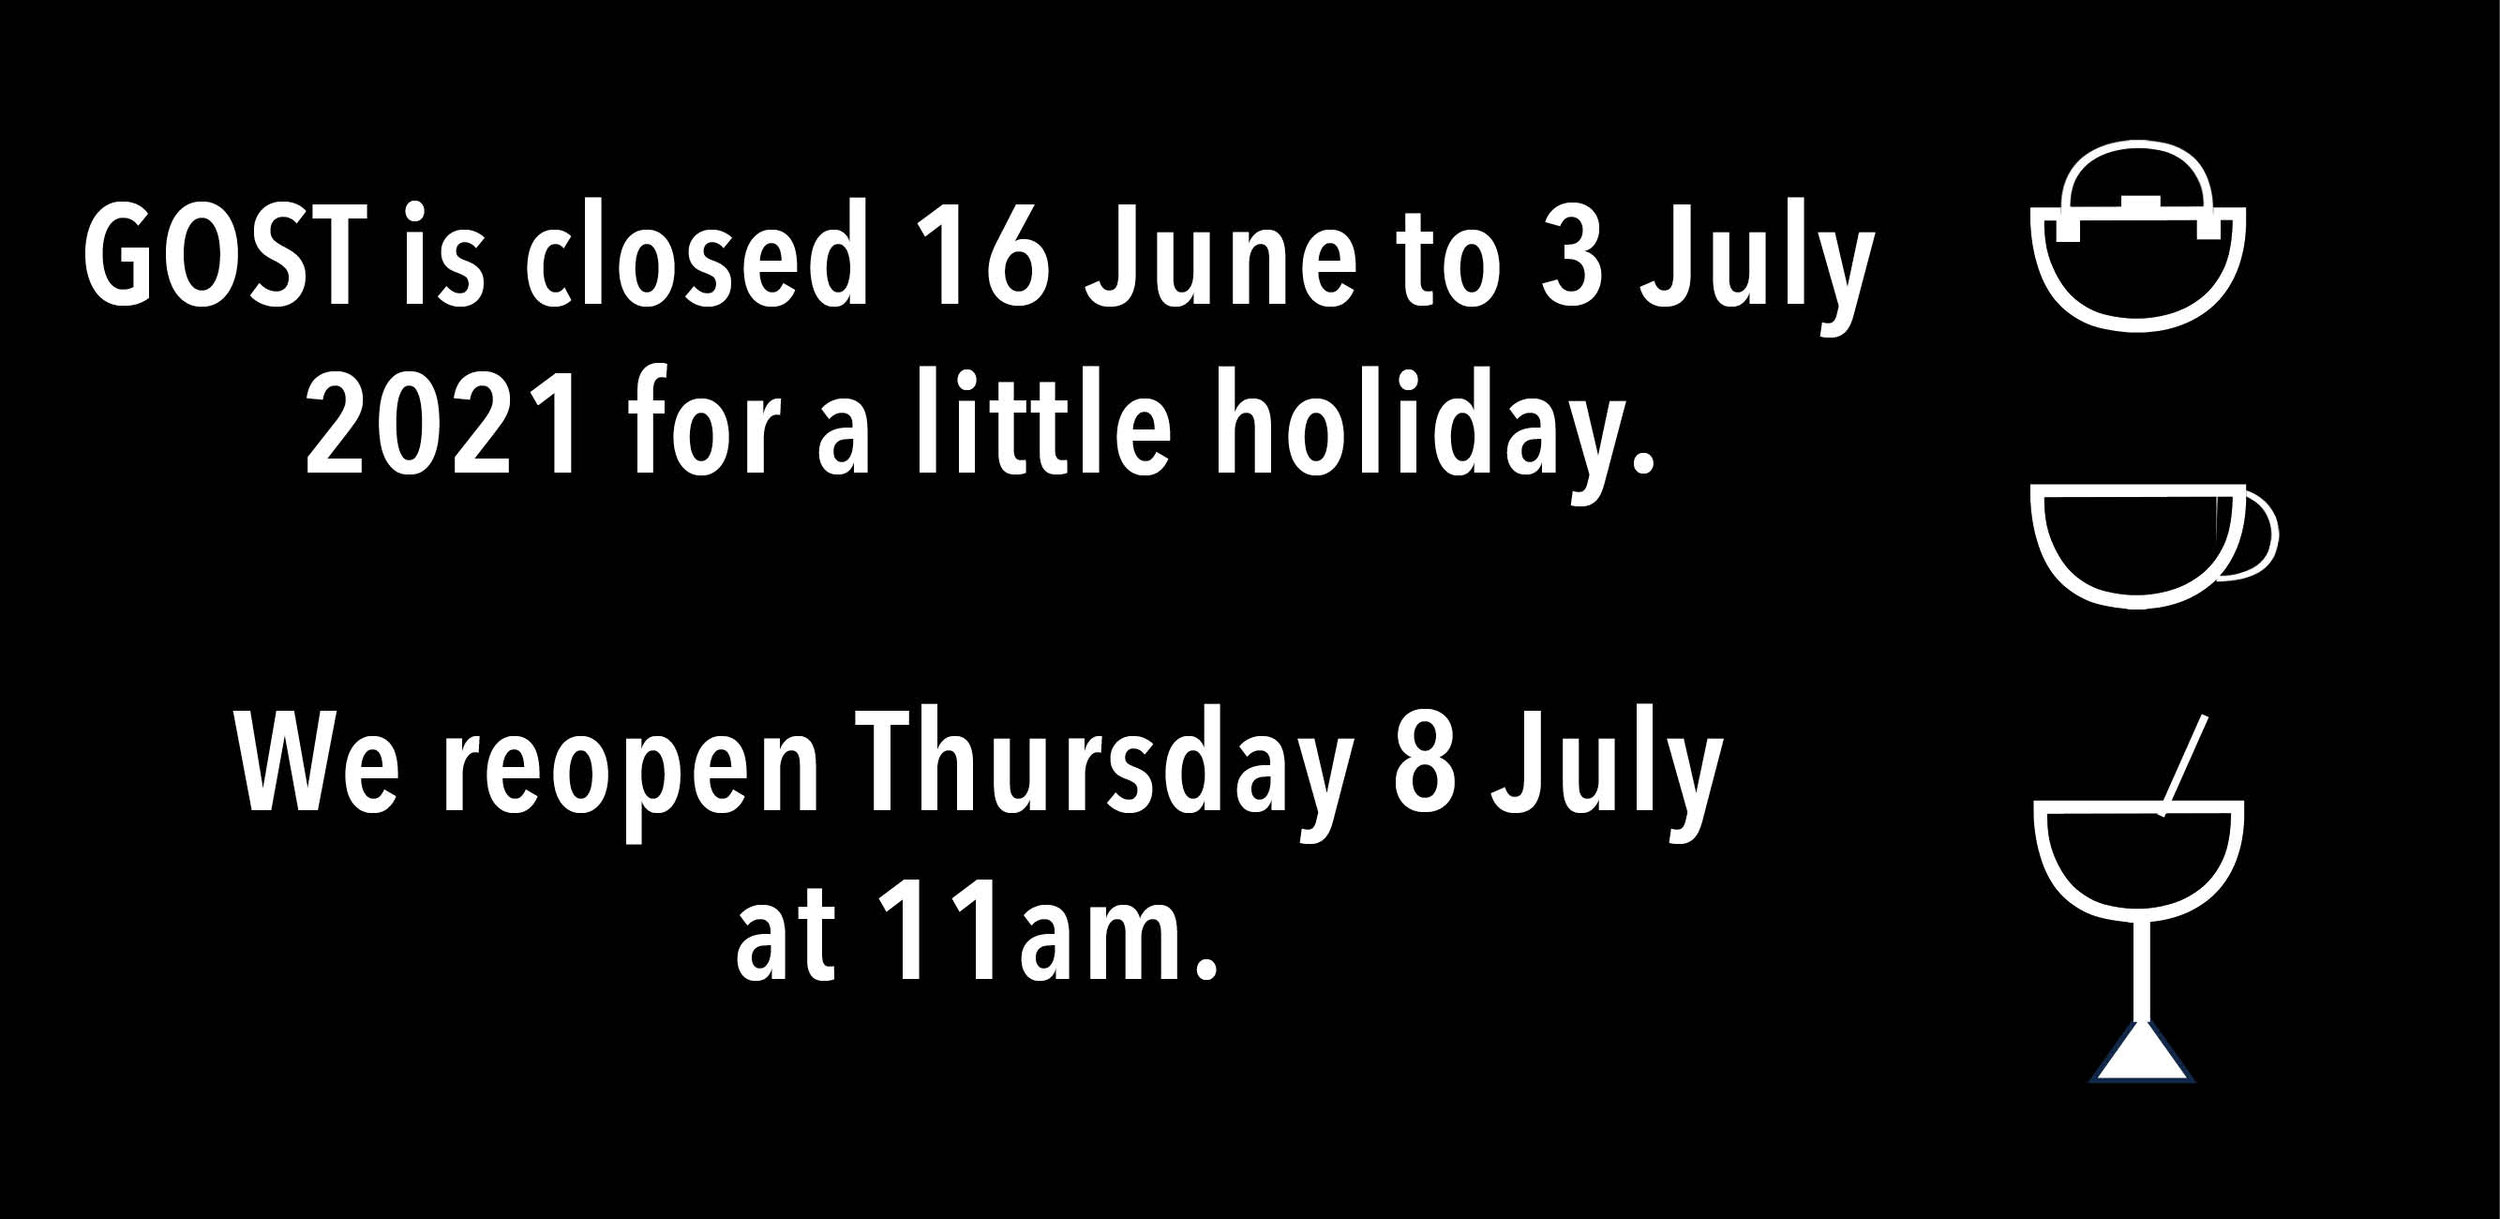 You can still shop online during this period. All purchases can be collected or posted from 8 July onwards. Thanks, Anne